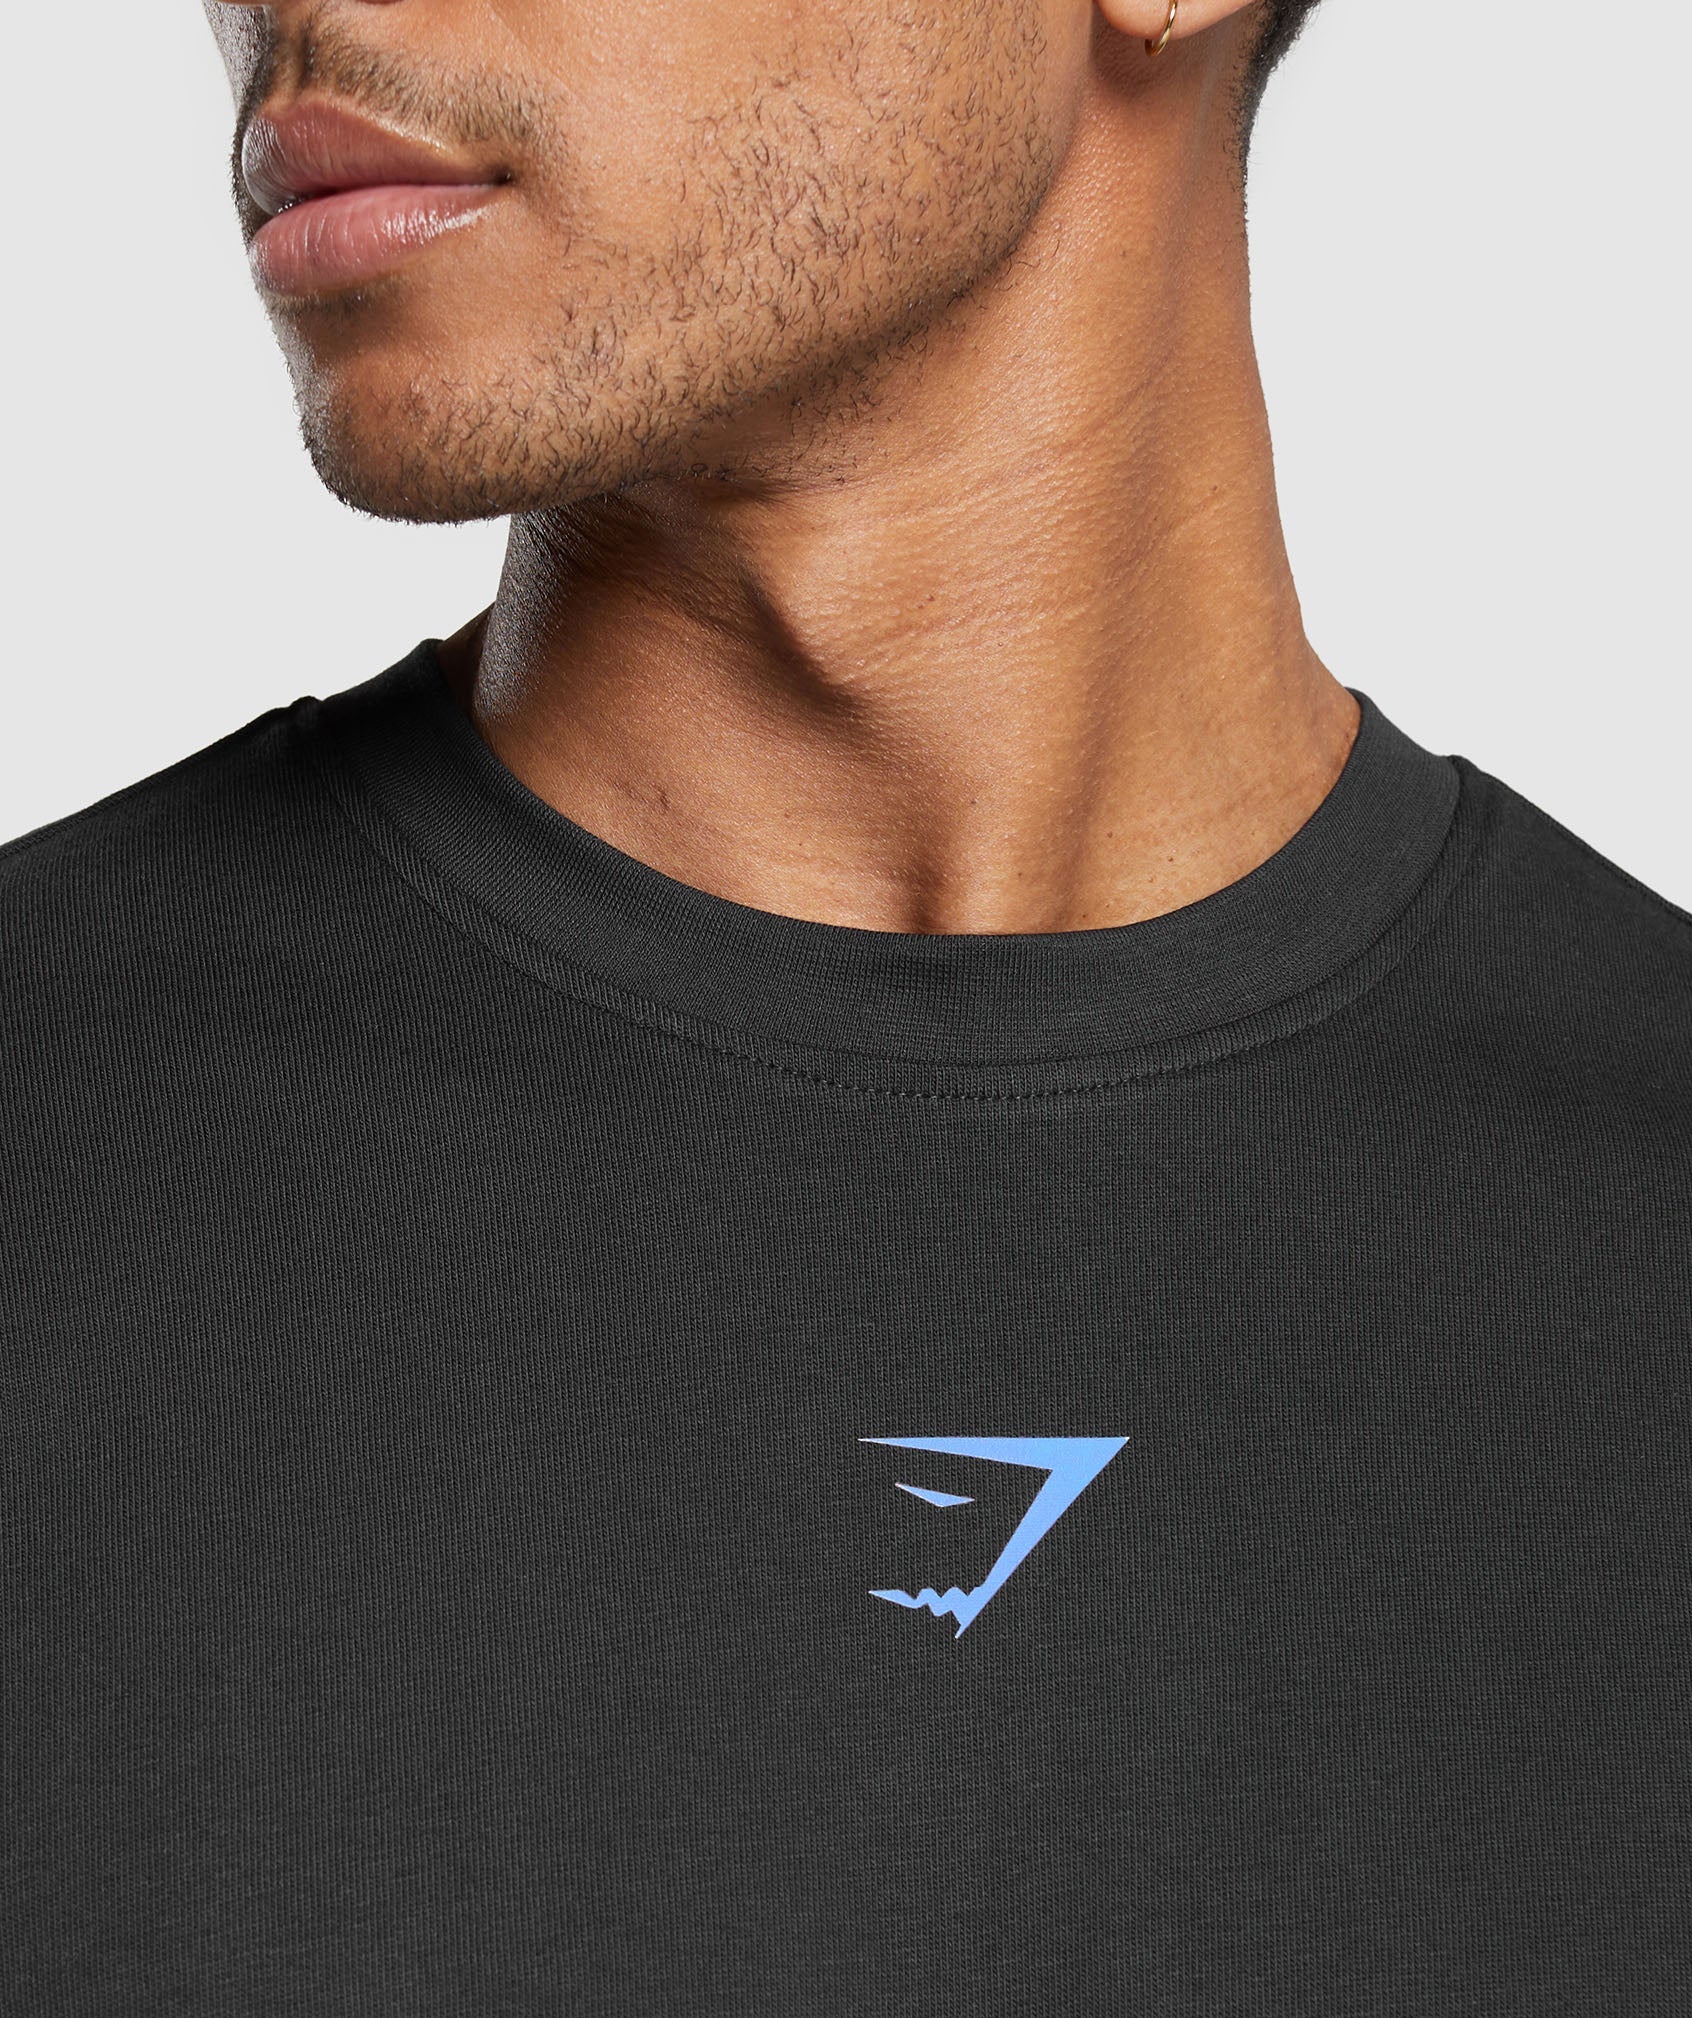 Miami Graphic T-Shirt in Black/Lats Blue - view 5